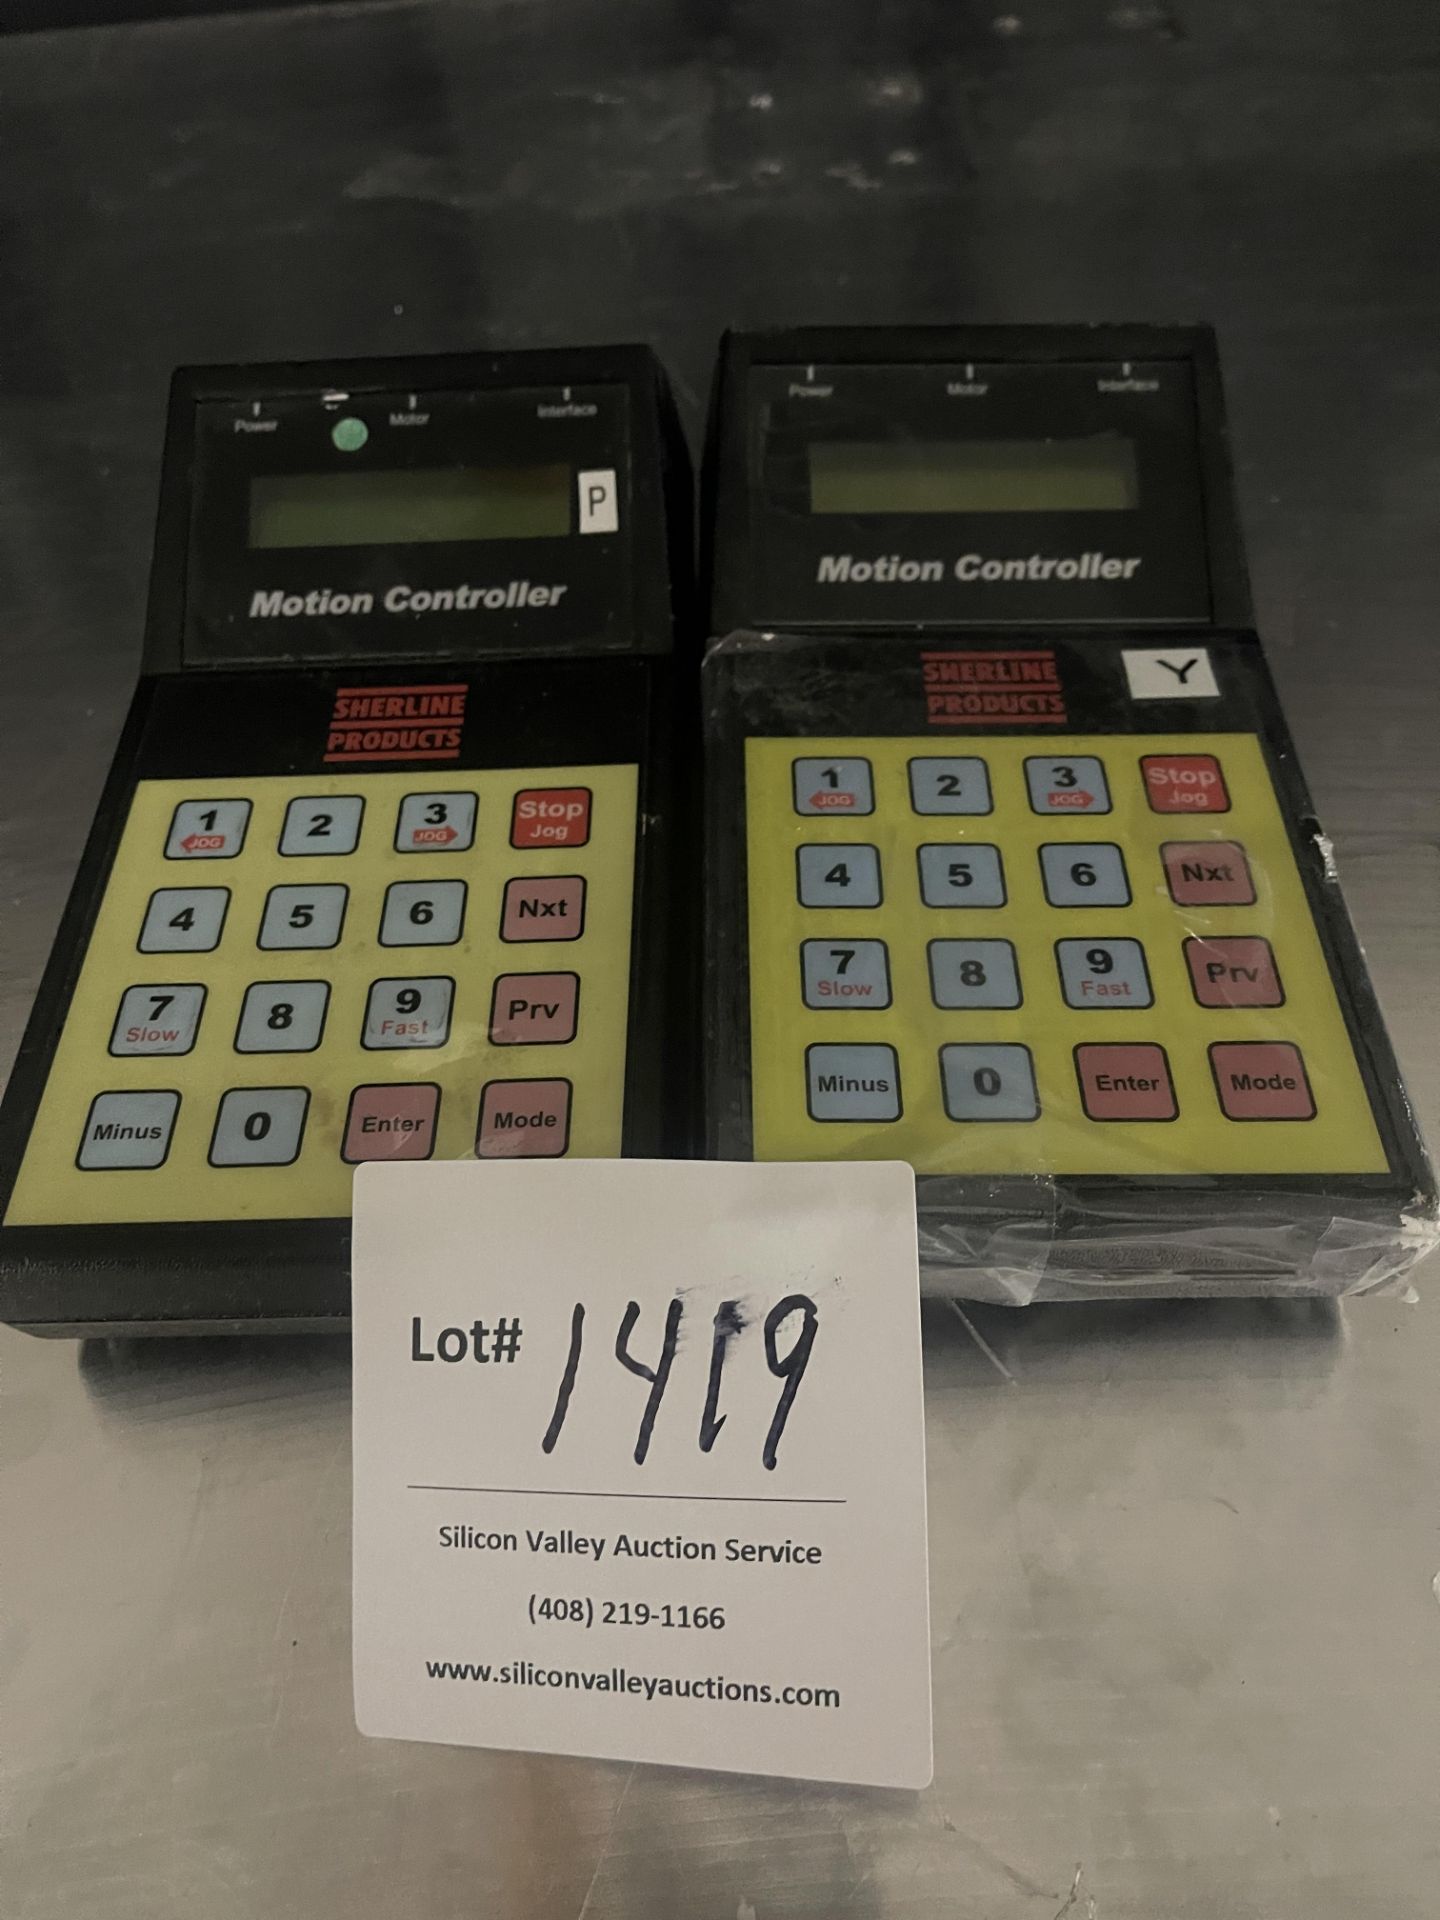 Two Sherline Products Motion Controllers